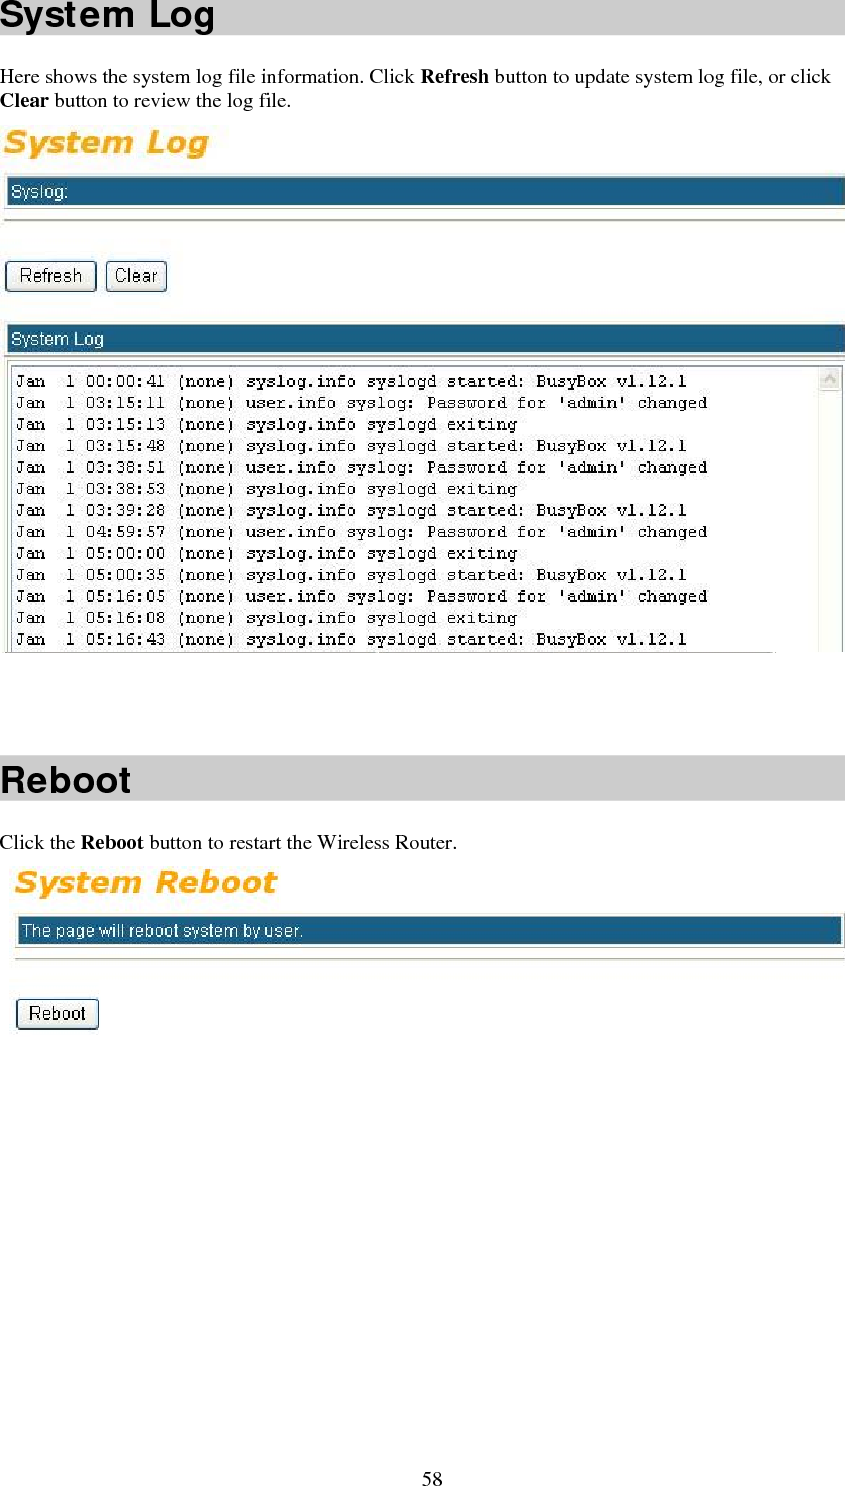   58System Log Here shows the system log file information. Click Refresh button to update system log file, or click Clear button to review the log file.            Reboot Click the Reboot button to restart the Wireless Router.   